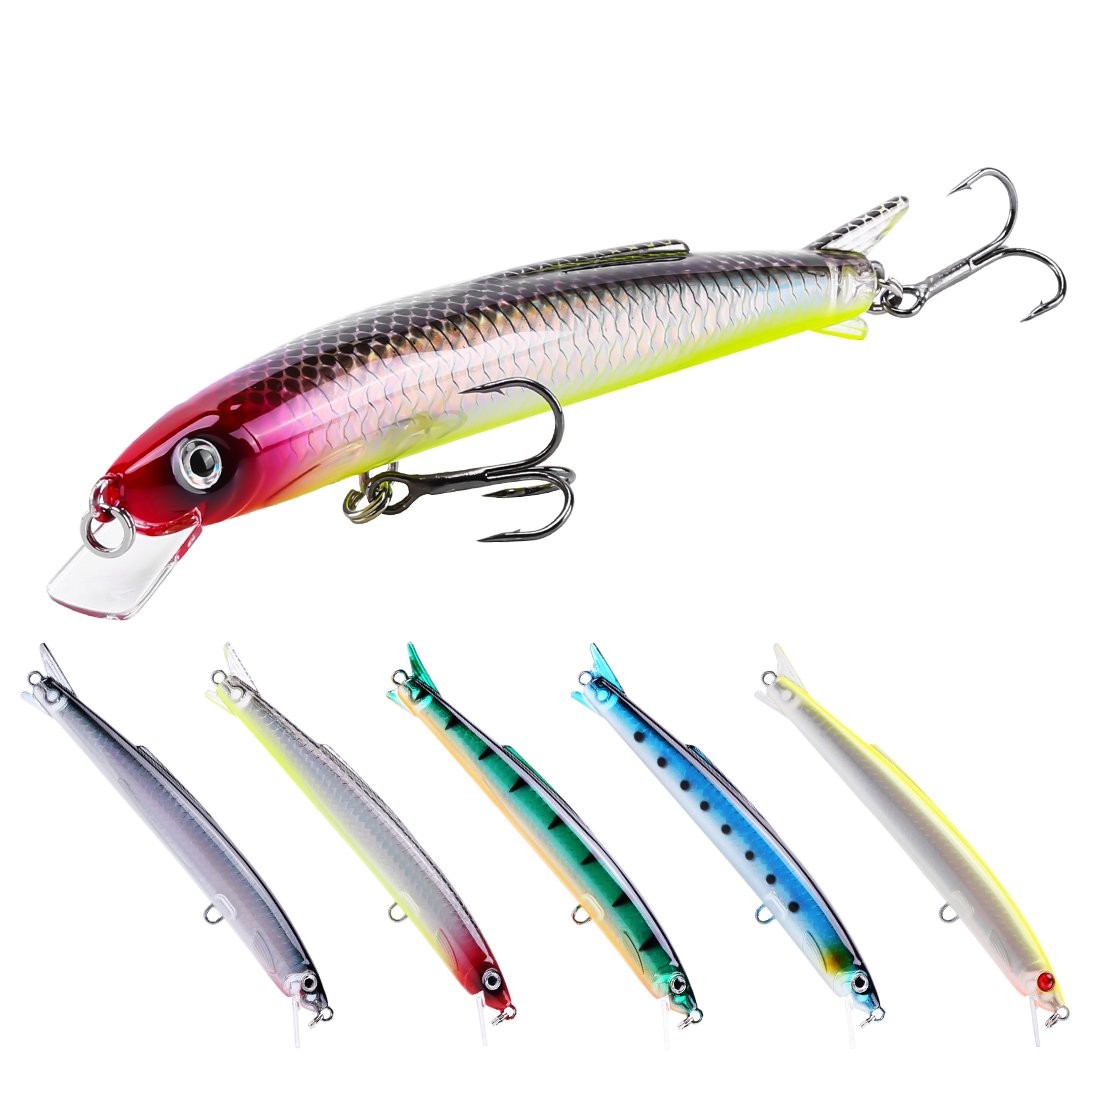 SeaKnight Minnow Fishing Lures Floating Sea Fishing Lures for Bass,Pike